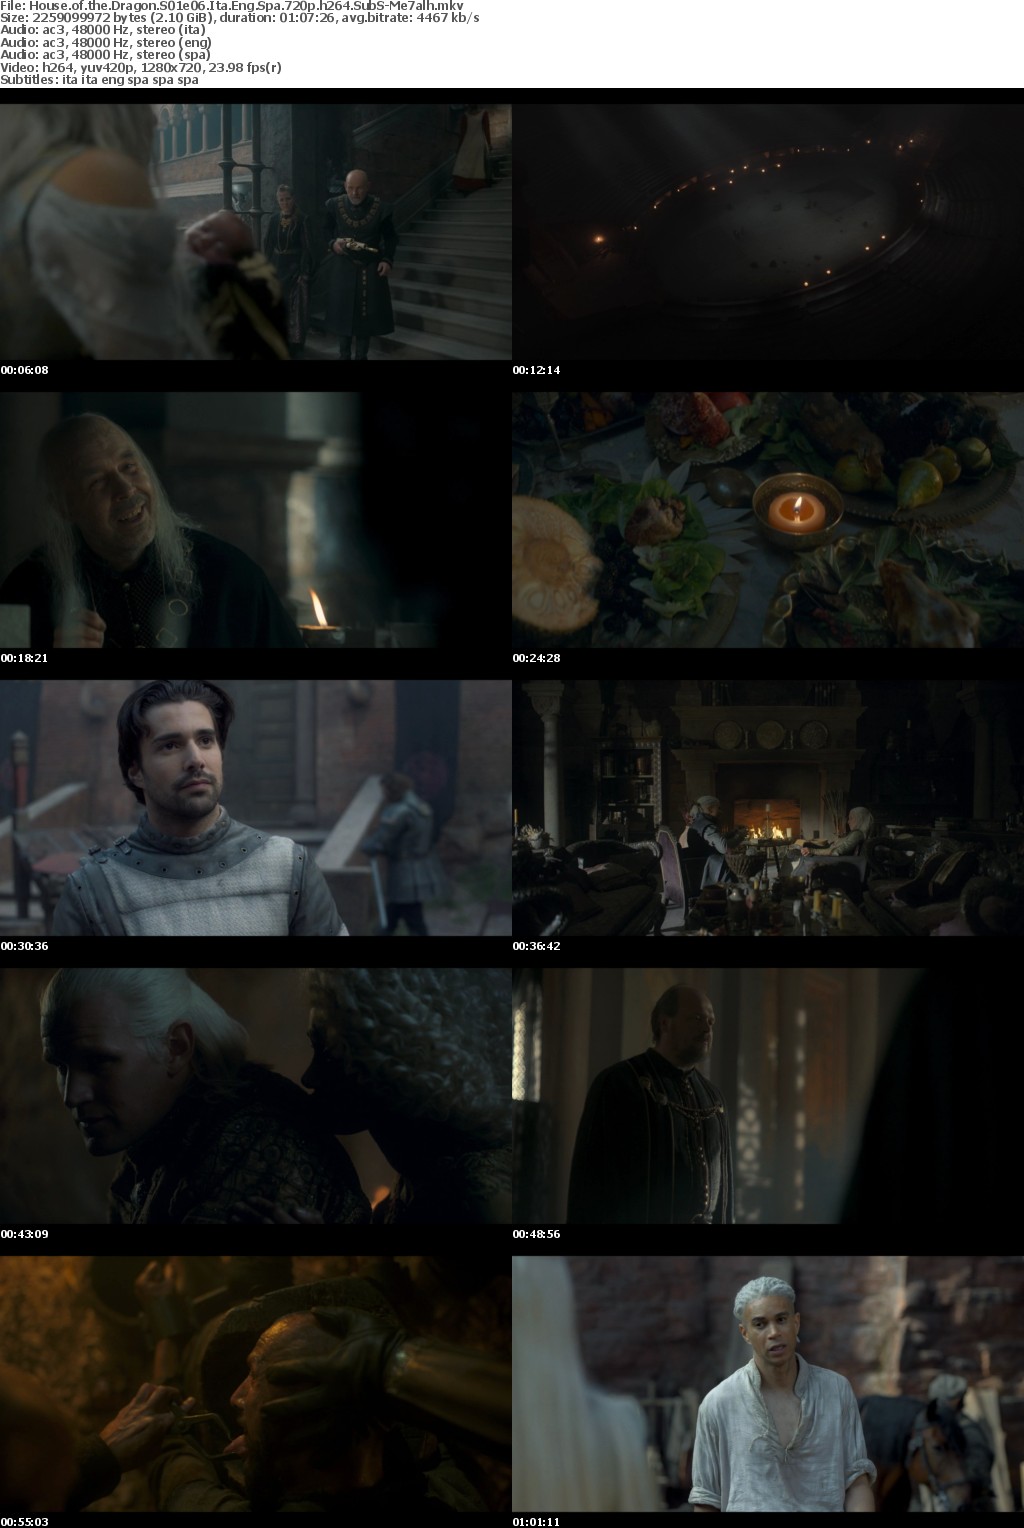 House Of The Dragon S01e06 720p Ita Eng Spa SubS MirCrewRelease byMe7alh